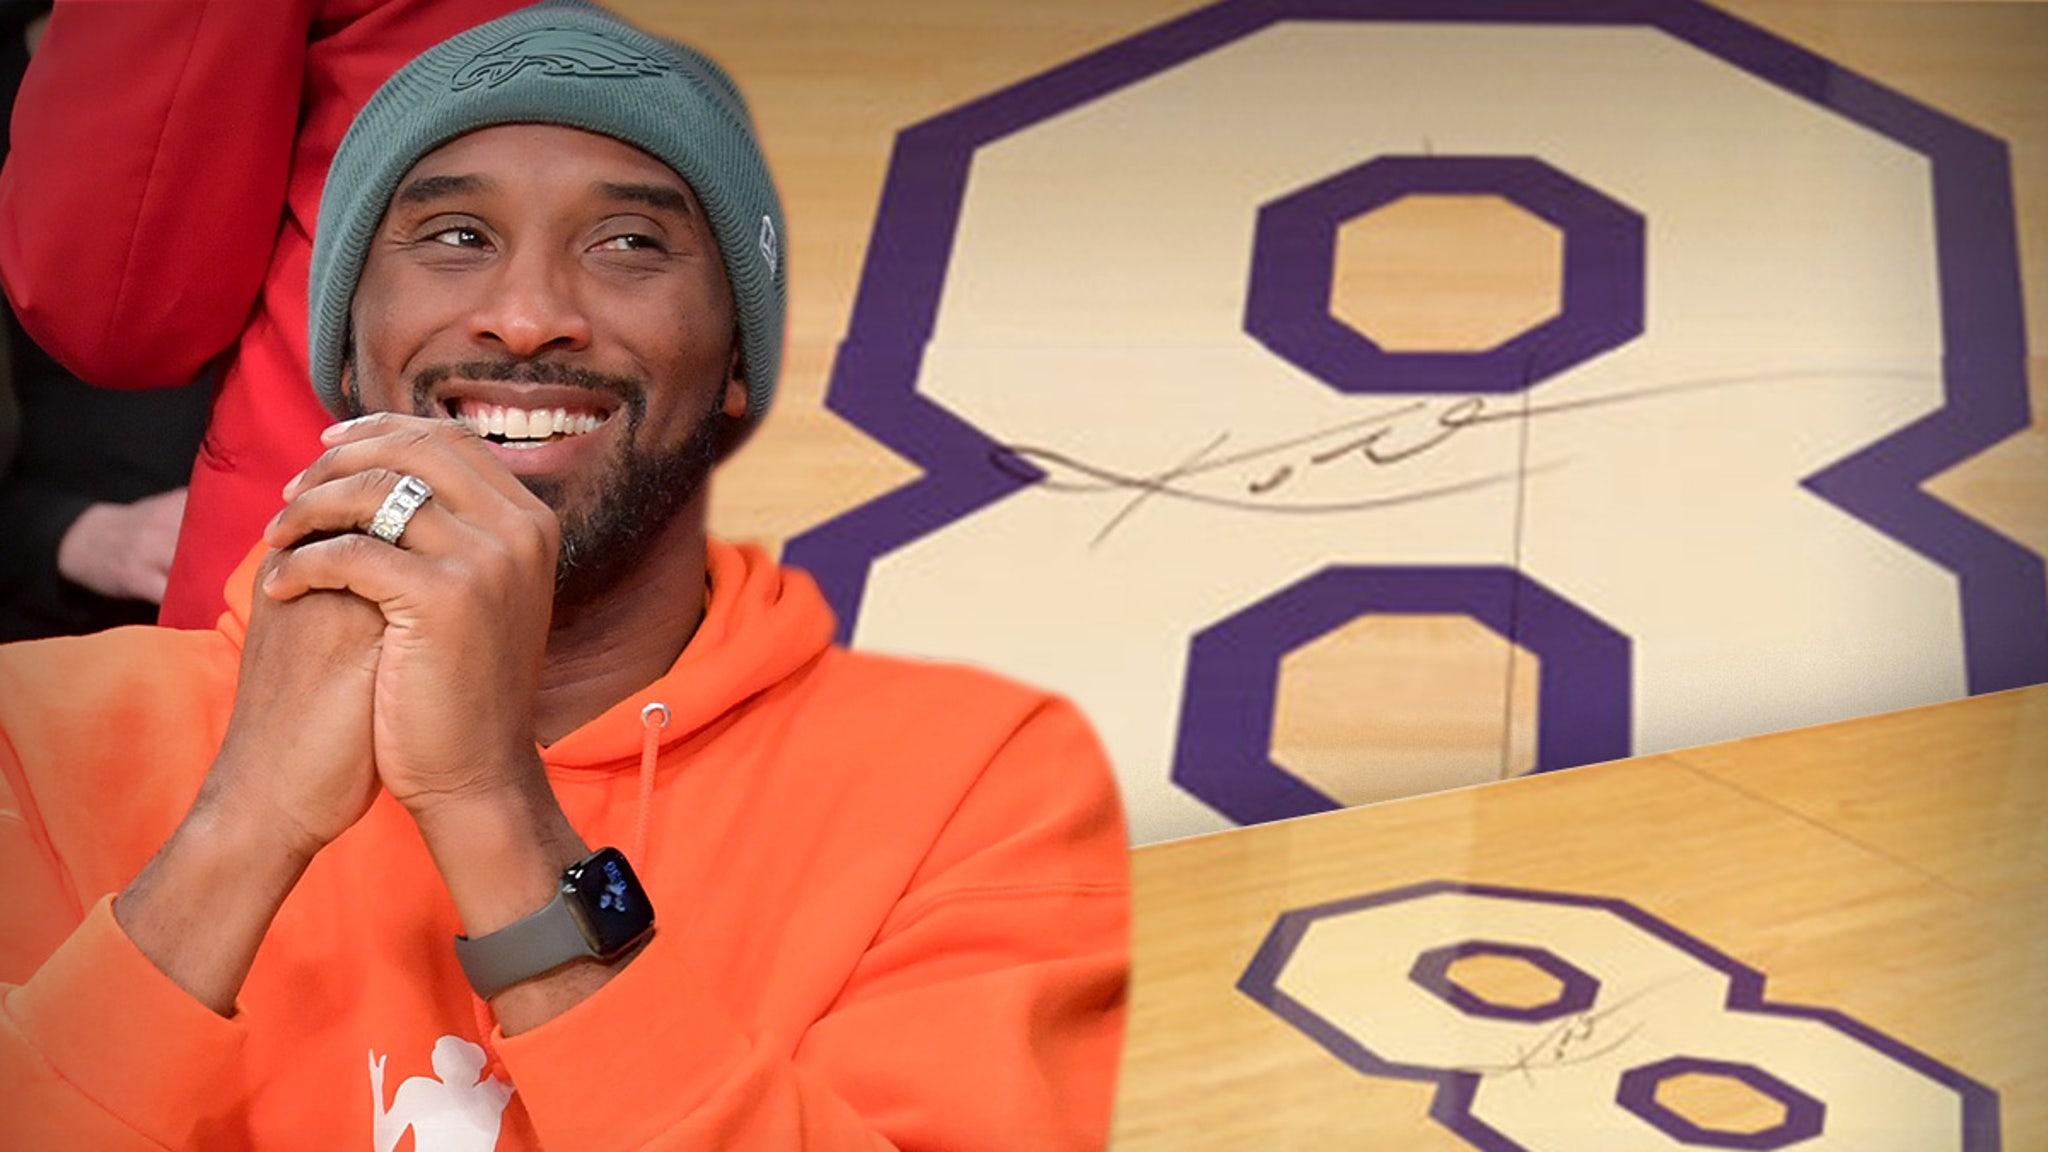 Kobe Bryant Signed Floor from Final Lakers Game Could Sell for